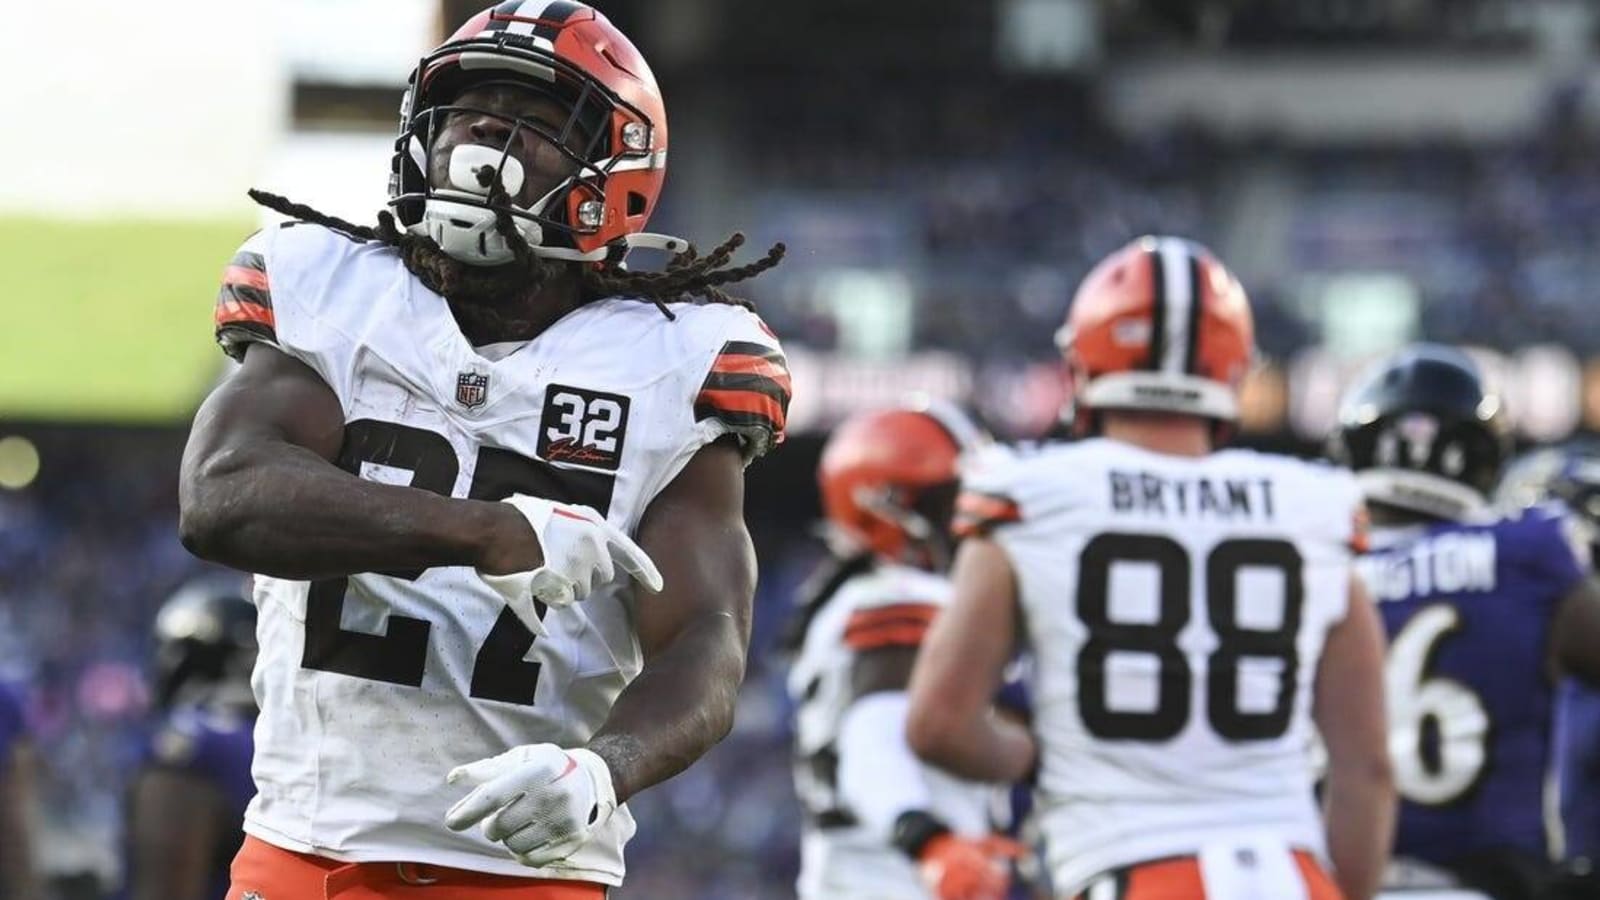 Browns rally from down 14 to shock Ravens